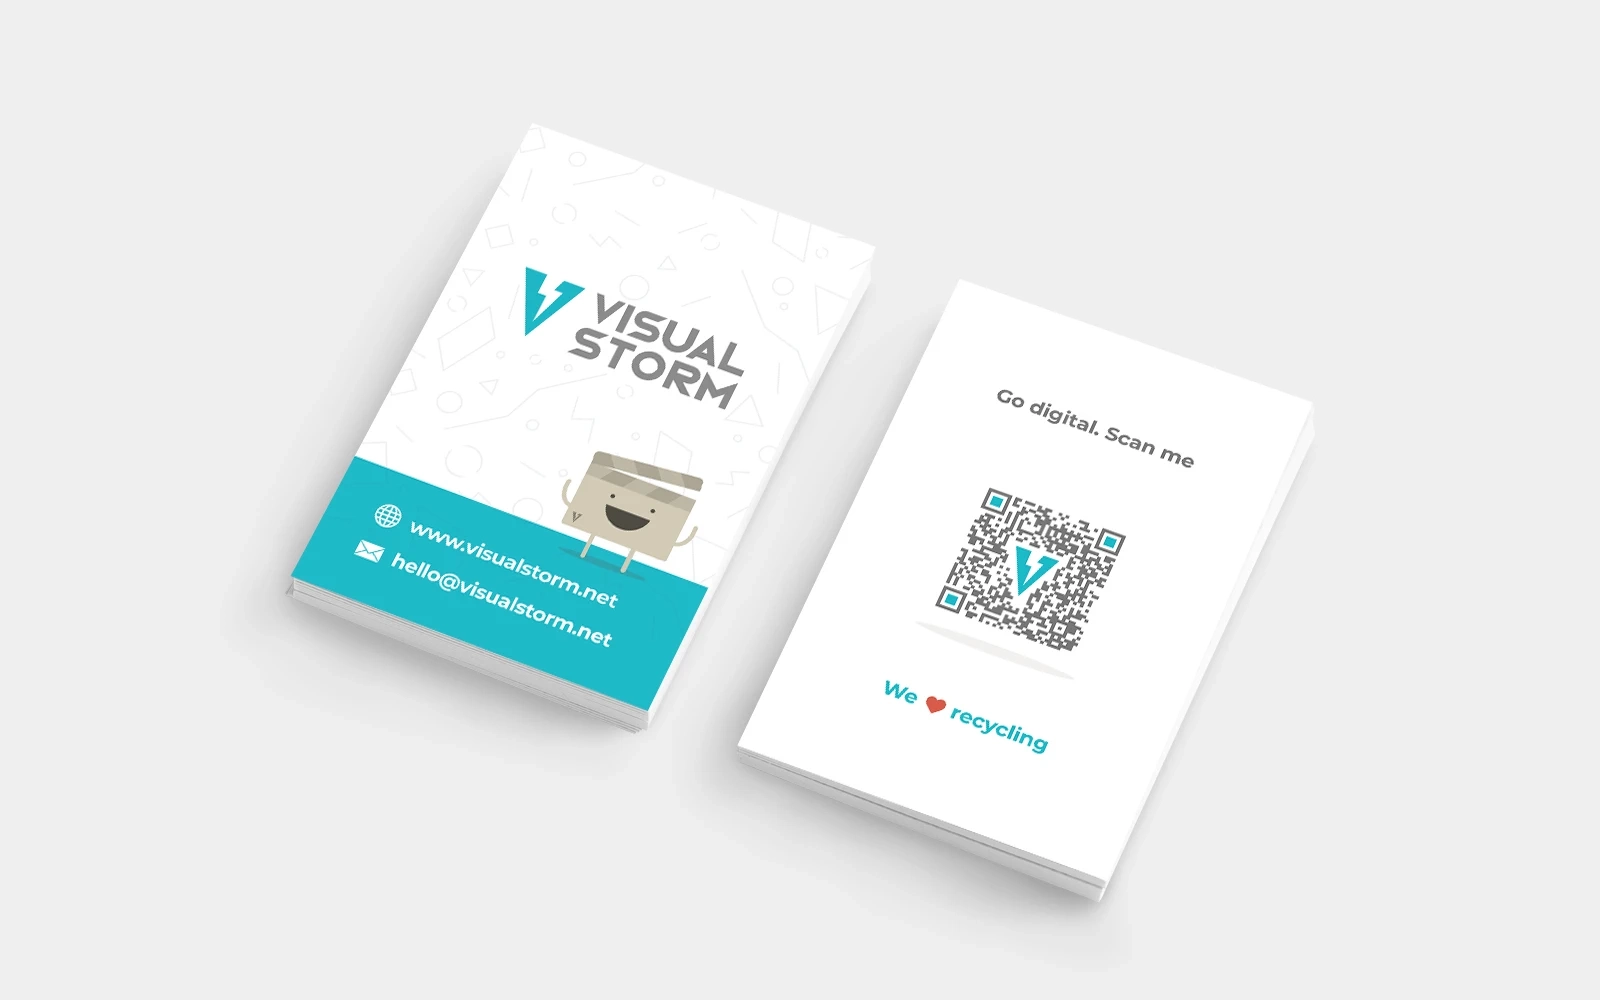 Both the back and the front of the portrait Visual Storm business cards are displayed at a slight angle and show the brand’s logo, mascot and contact information in a clean, fun and modern way